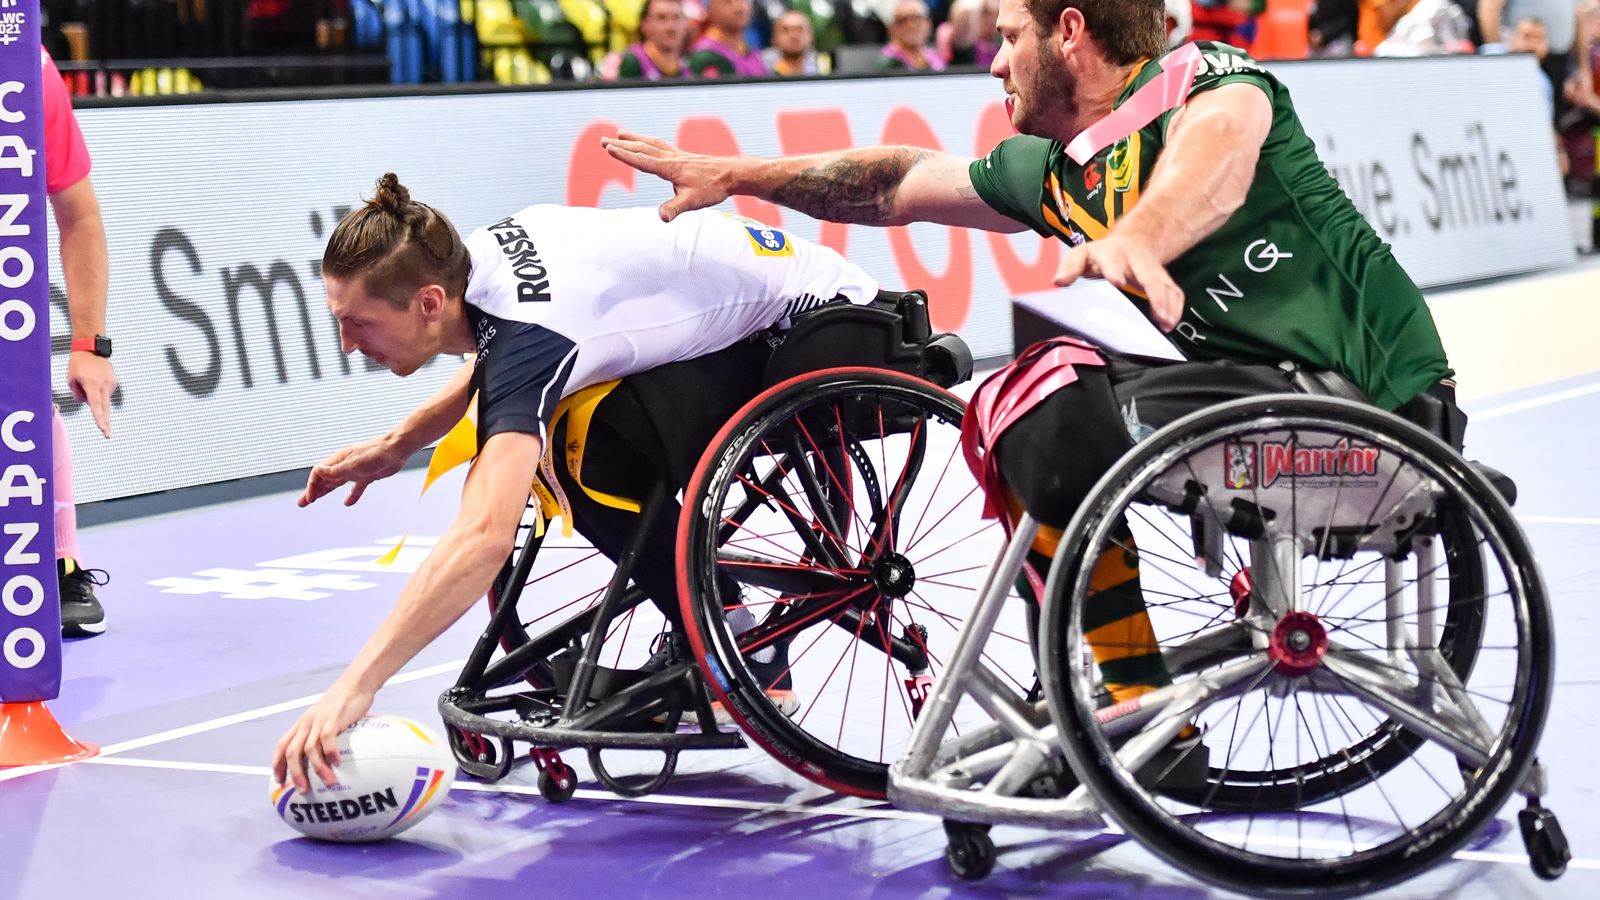 rugby-league-world-cup-jack-brown-stars-as-england-open-wheelchair-tournament-with-win-over-australia